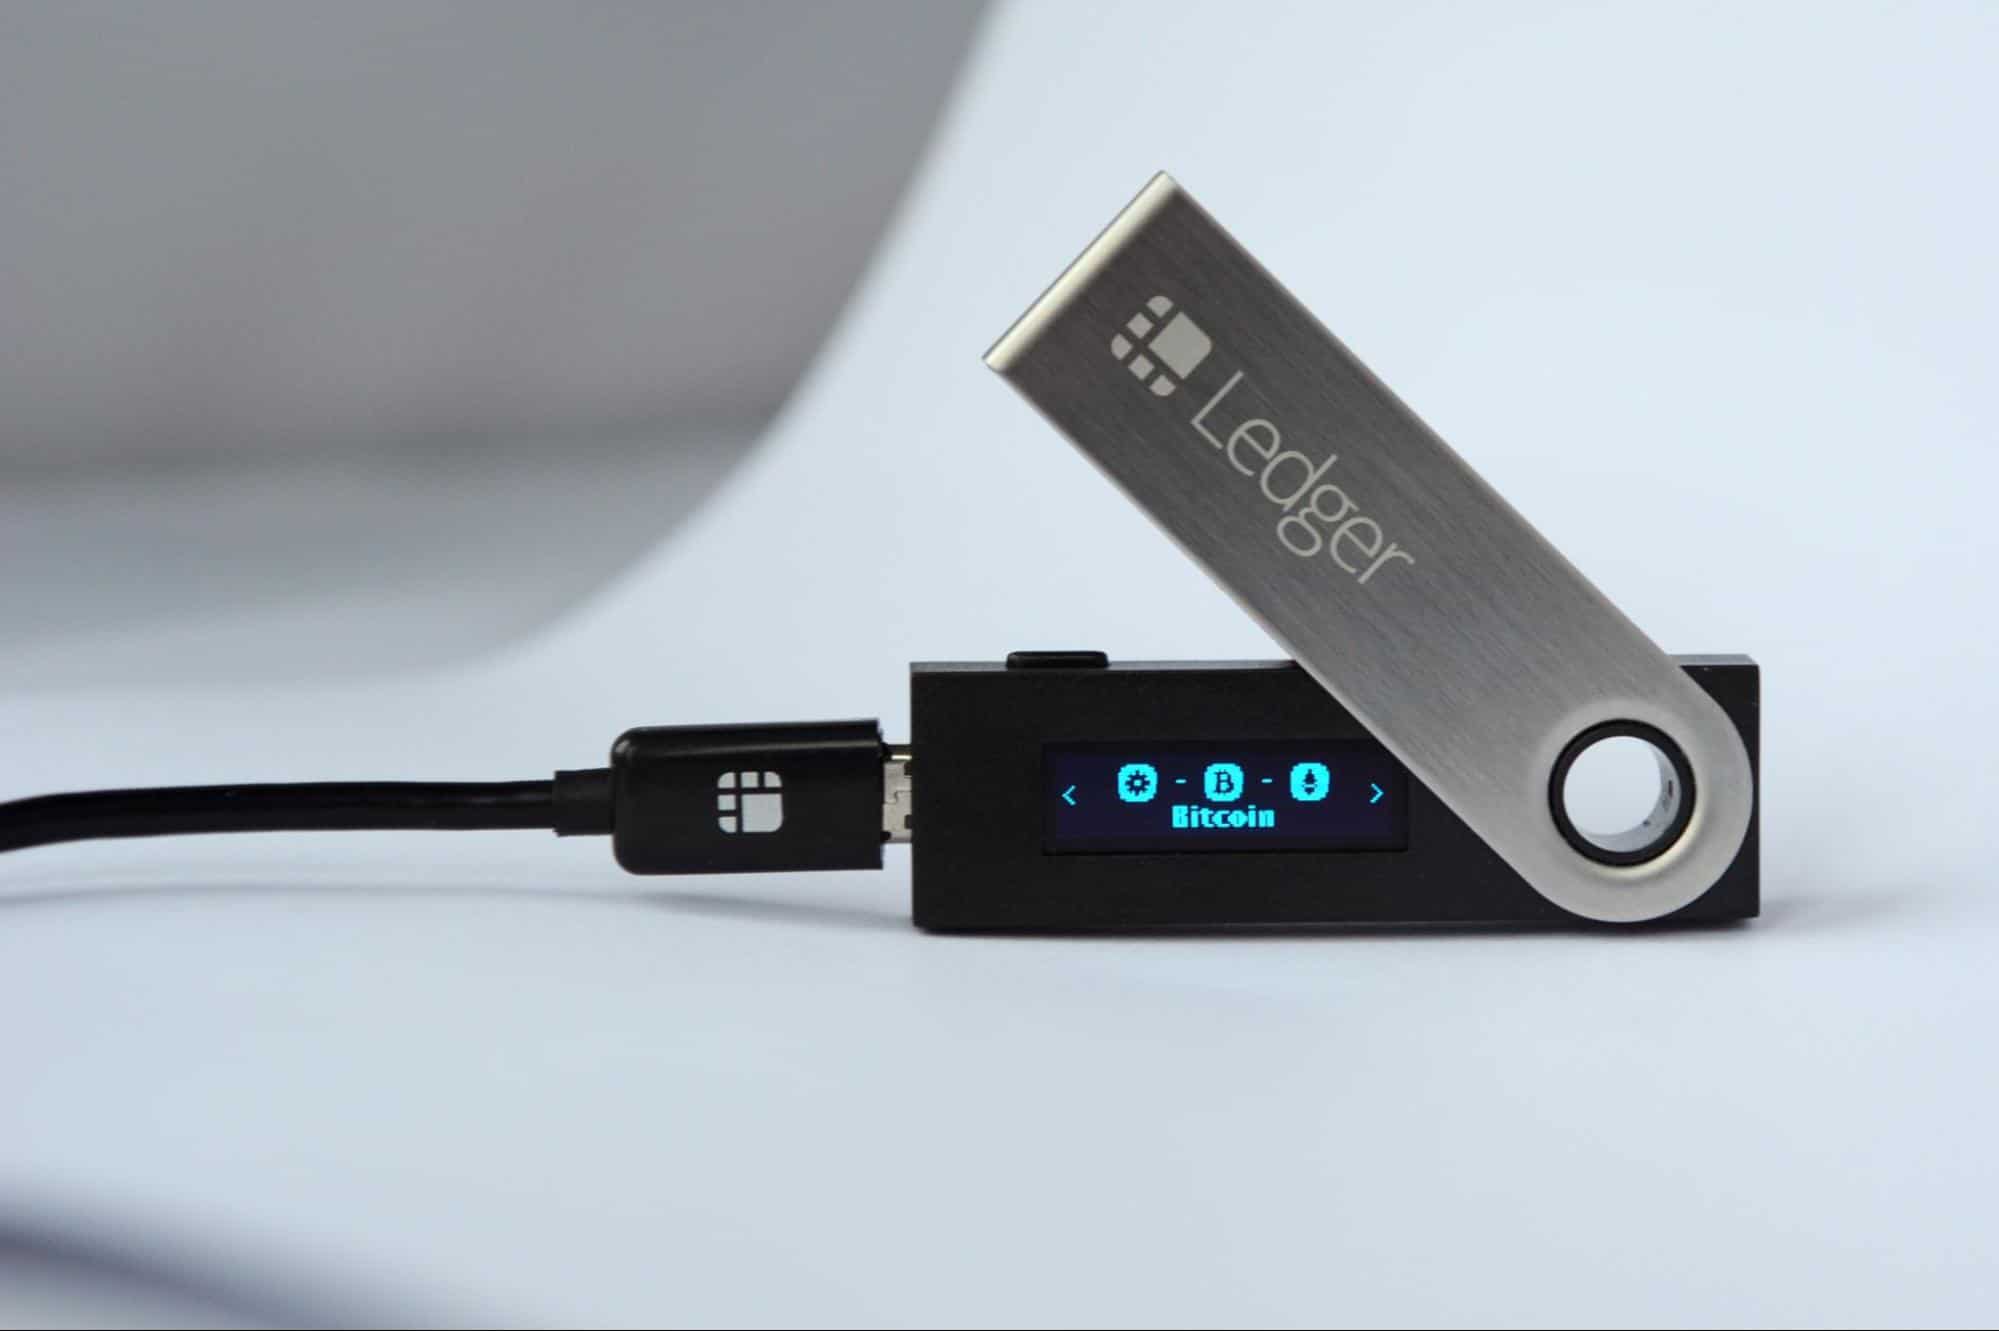 Ledger Nano Crypto Hardware Wallets Review and Pricing | Security.org